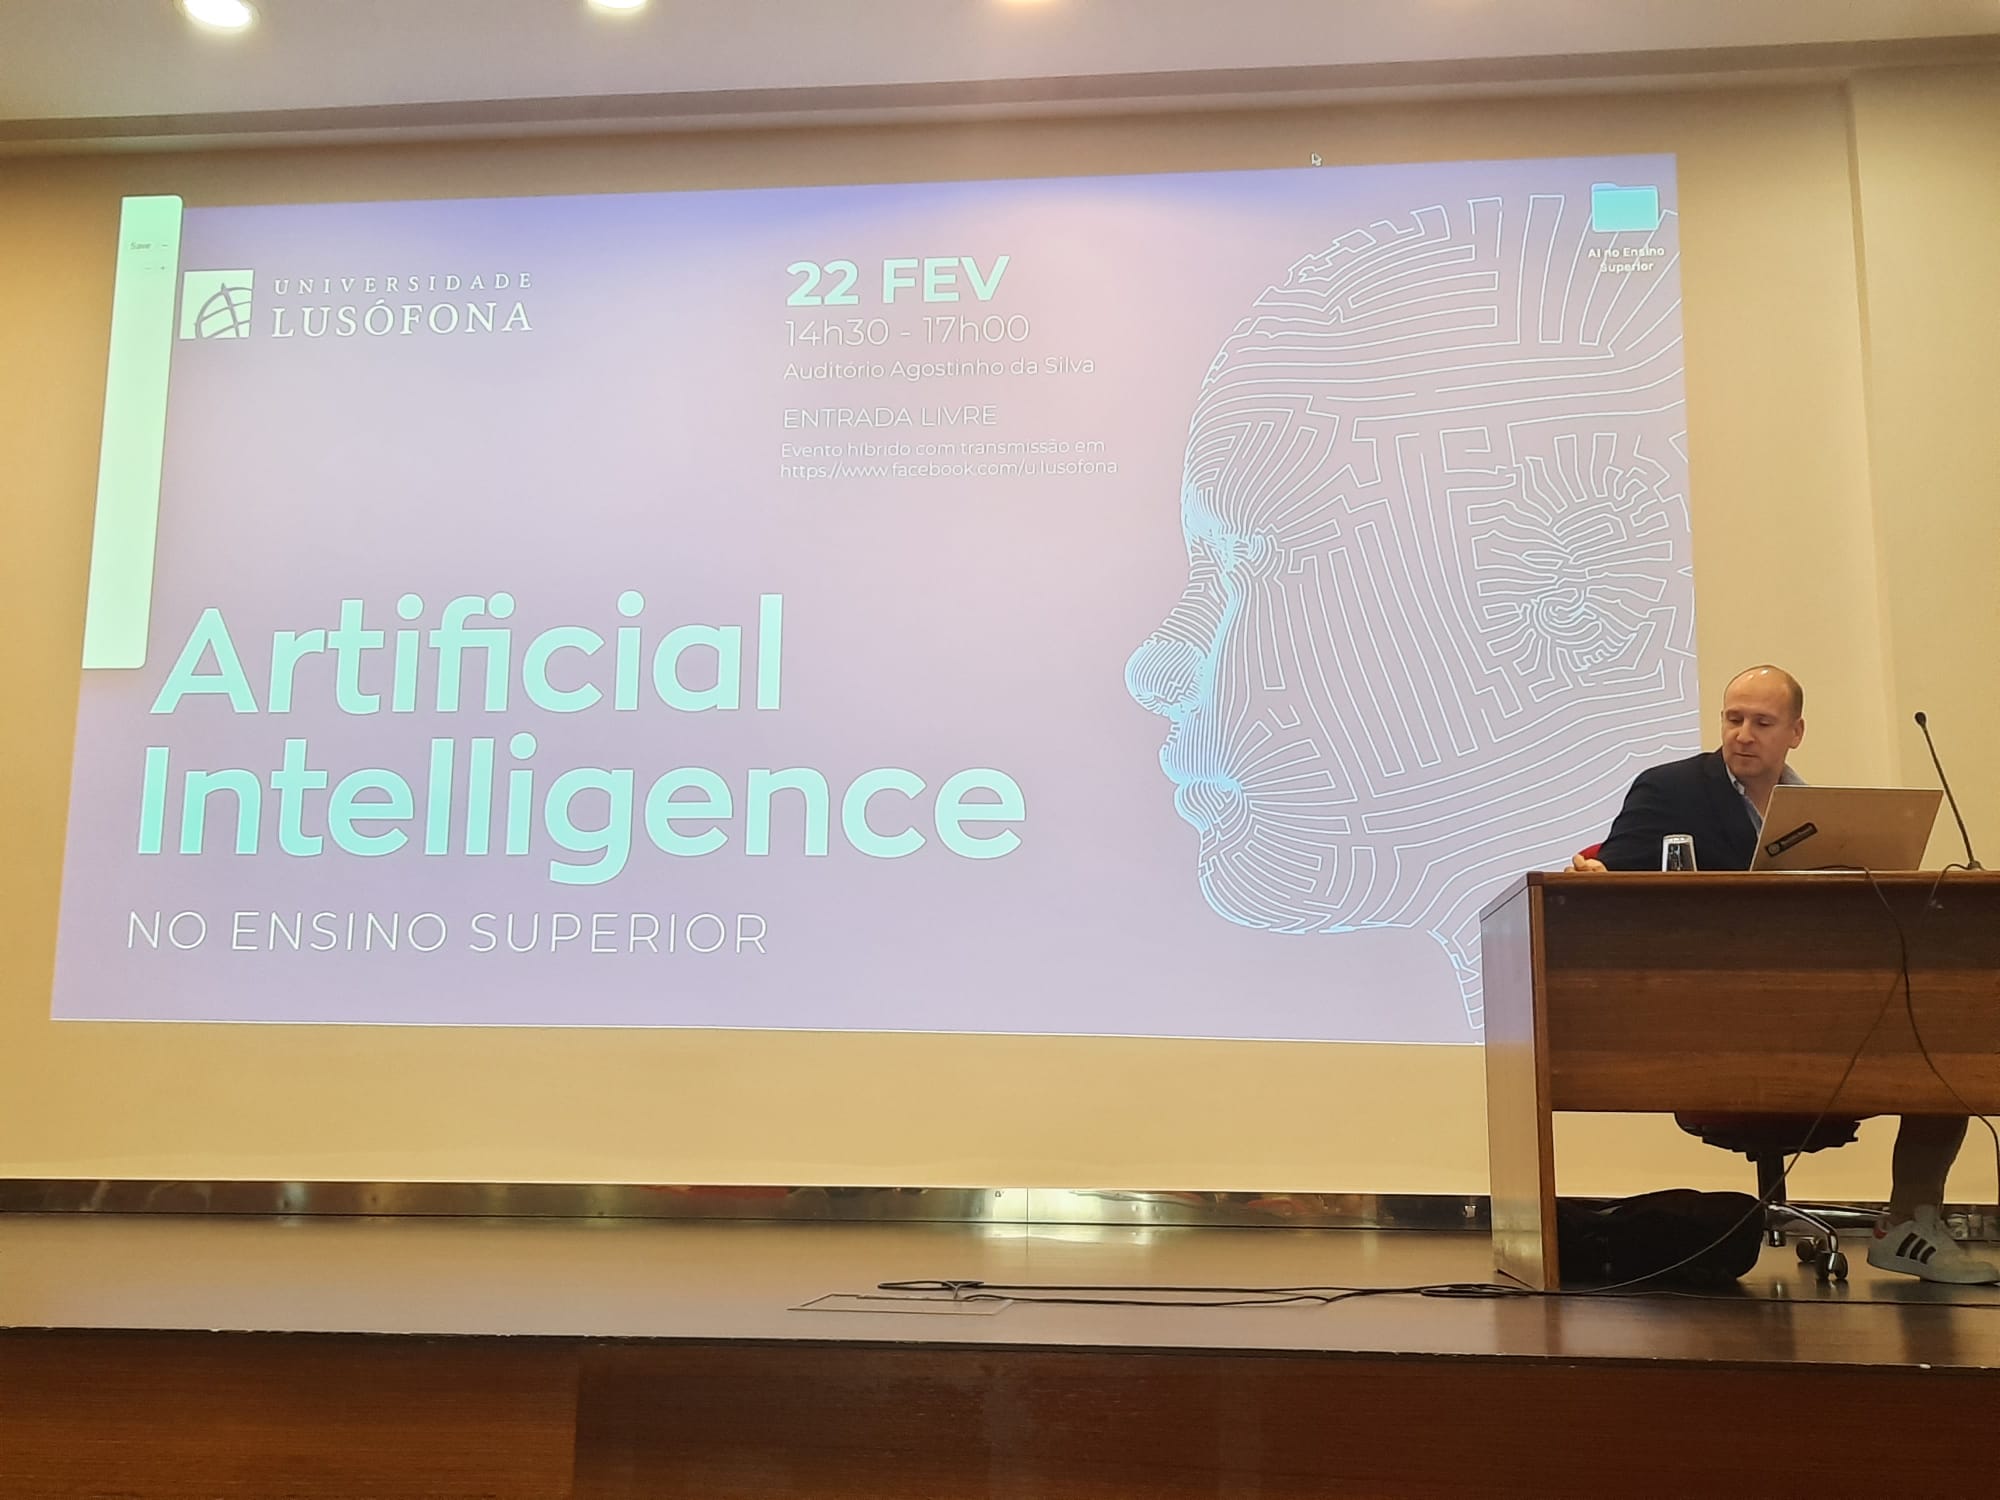 Jorge Sousa participated in the "Artificial Intelligence in Higher Education" event at Universidade Lusófona where he presented BOTSchool as a Conversational AI Platform.